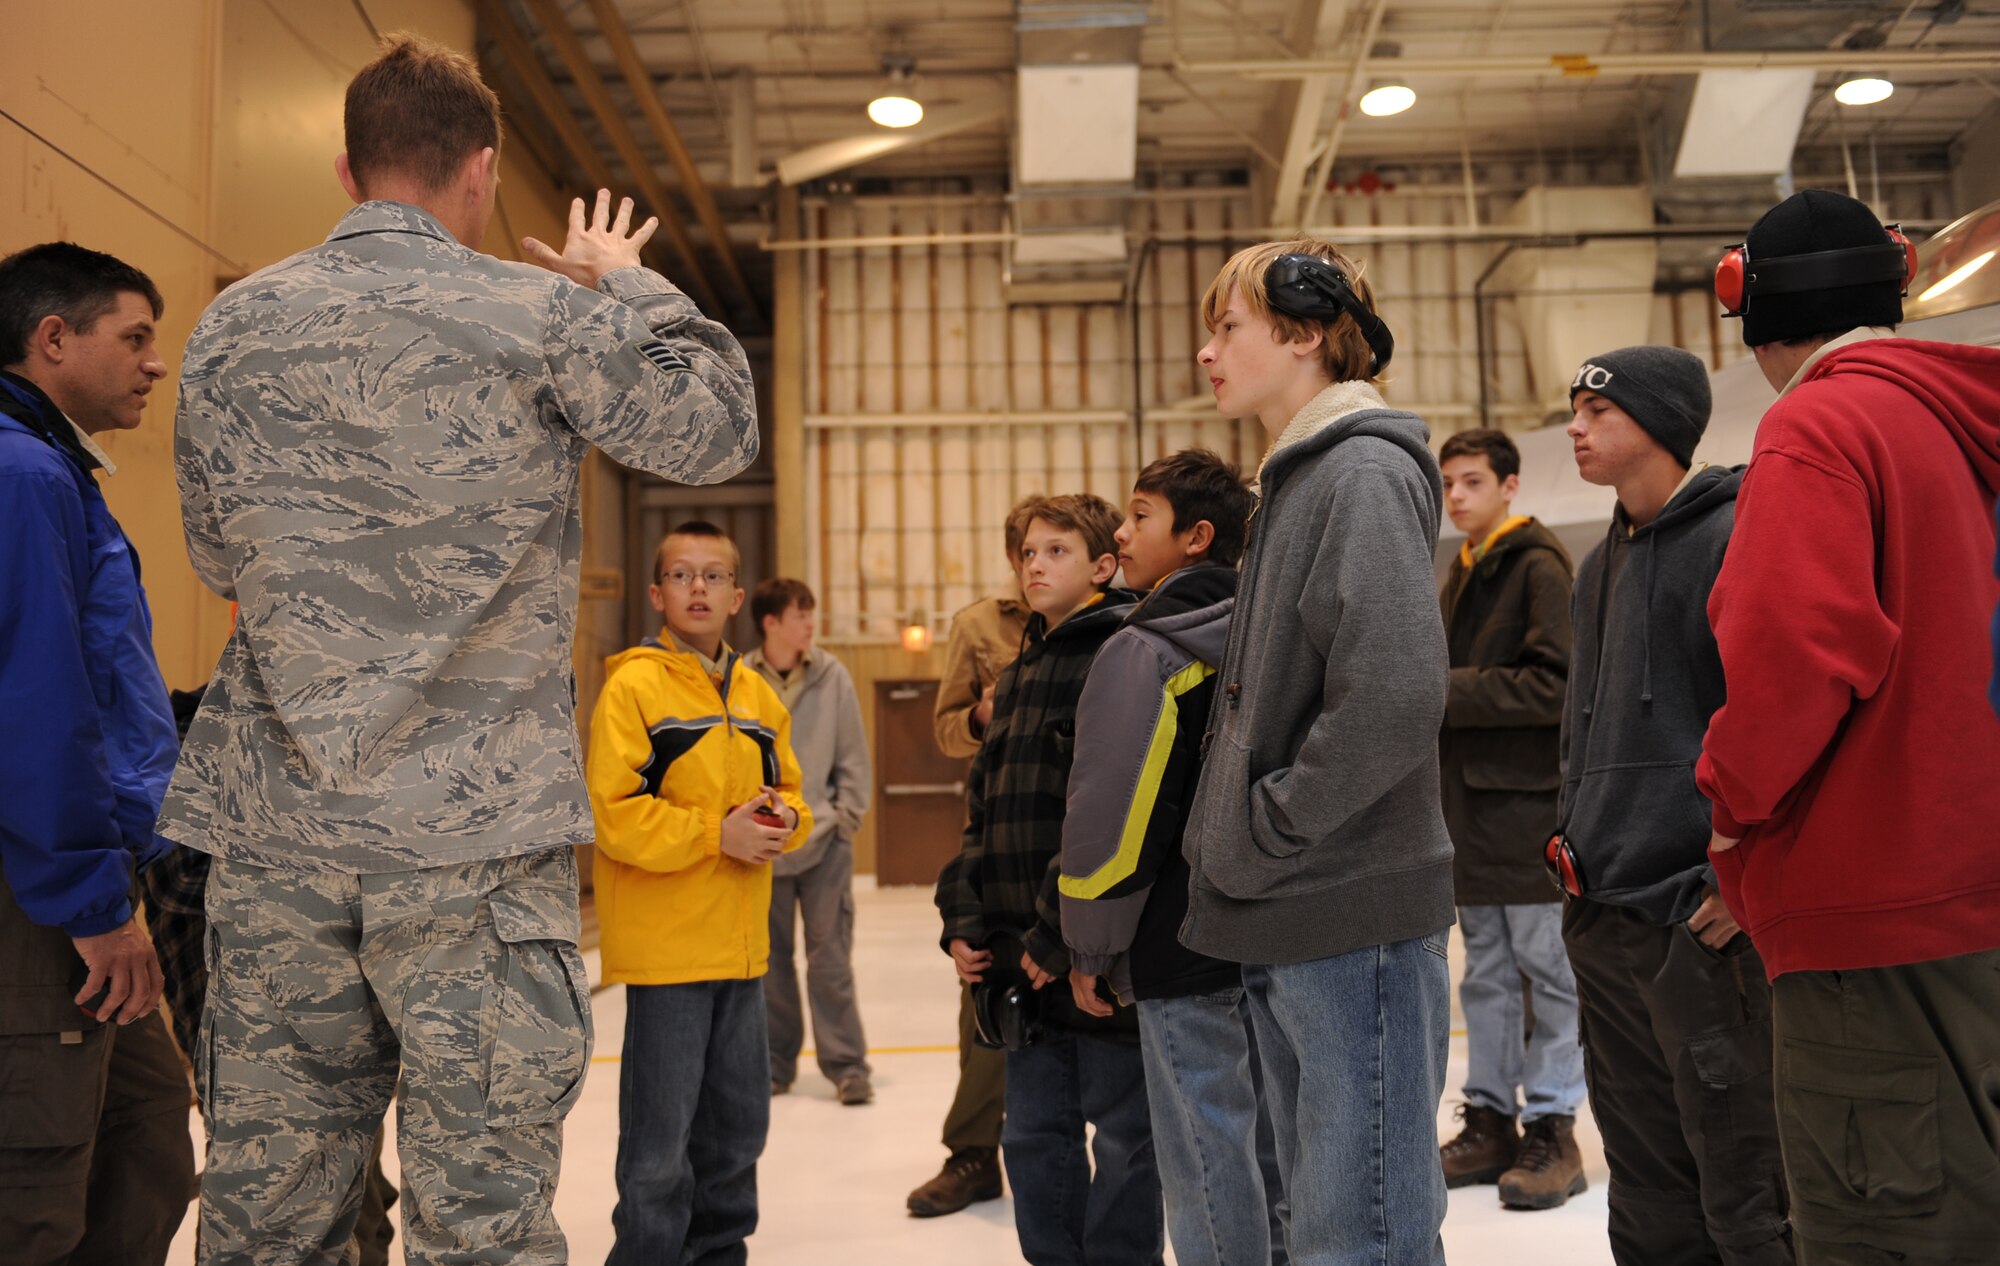 Staff Sgt. Matthew St John, 49th Maintenance Operations Squadron, briefs Boy Scout Troop 174, based out of Albuquerque, N.M., on the F-22A Raptor's capabilities during an F-22A Familiarization Course March 27 at Holloman Air Force Base, N.M. The troop stopped at Holloman for a day during their trip and surrounding areas such as White Sands National Monument. 